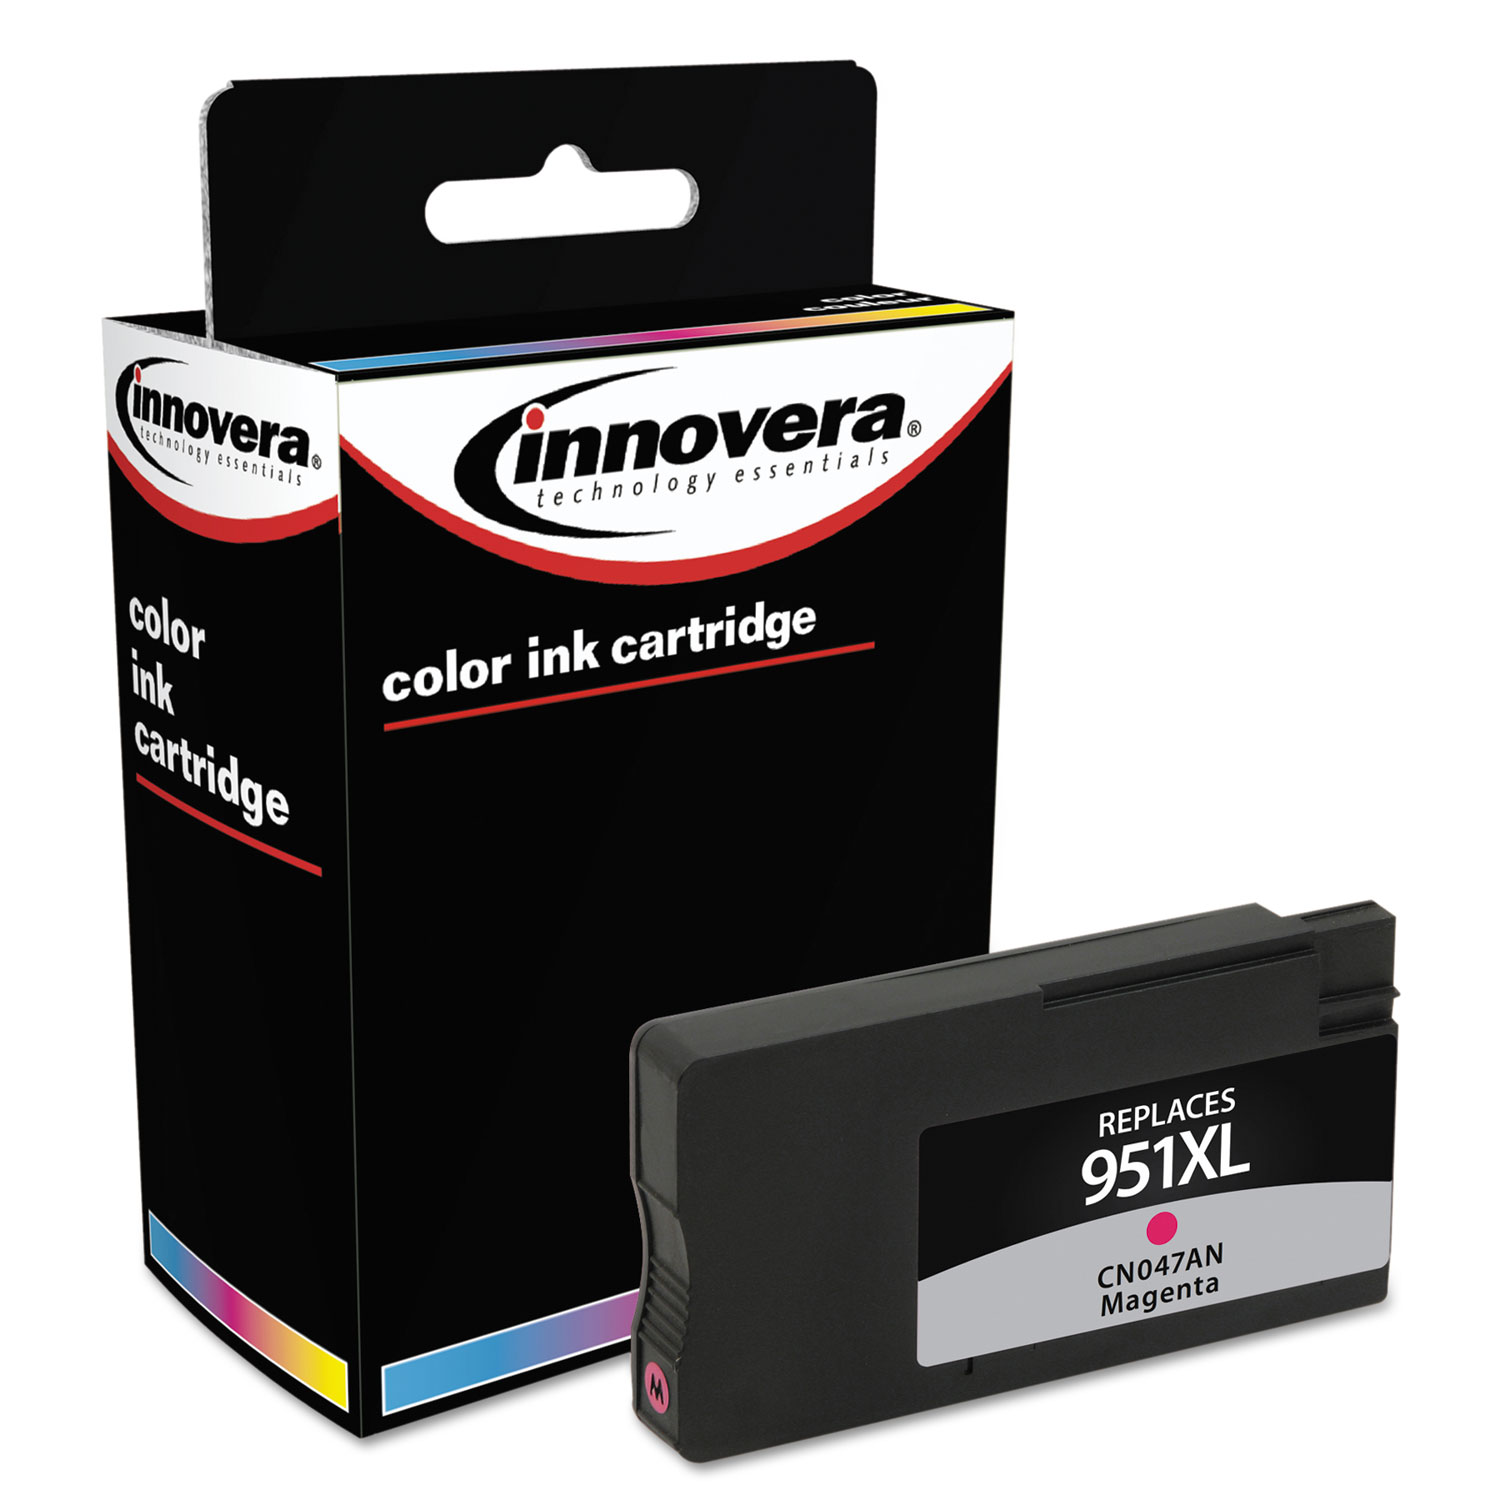  Innovera IVR951XLM Remanufactured CN047AN (951XL) High-Yield Ink, 1500 Page-Yield, Magenta (IVR951XLM) 